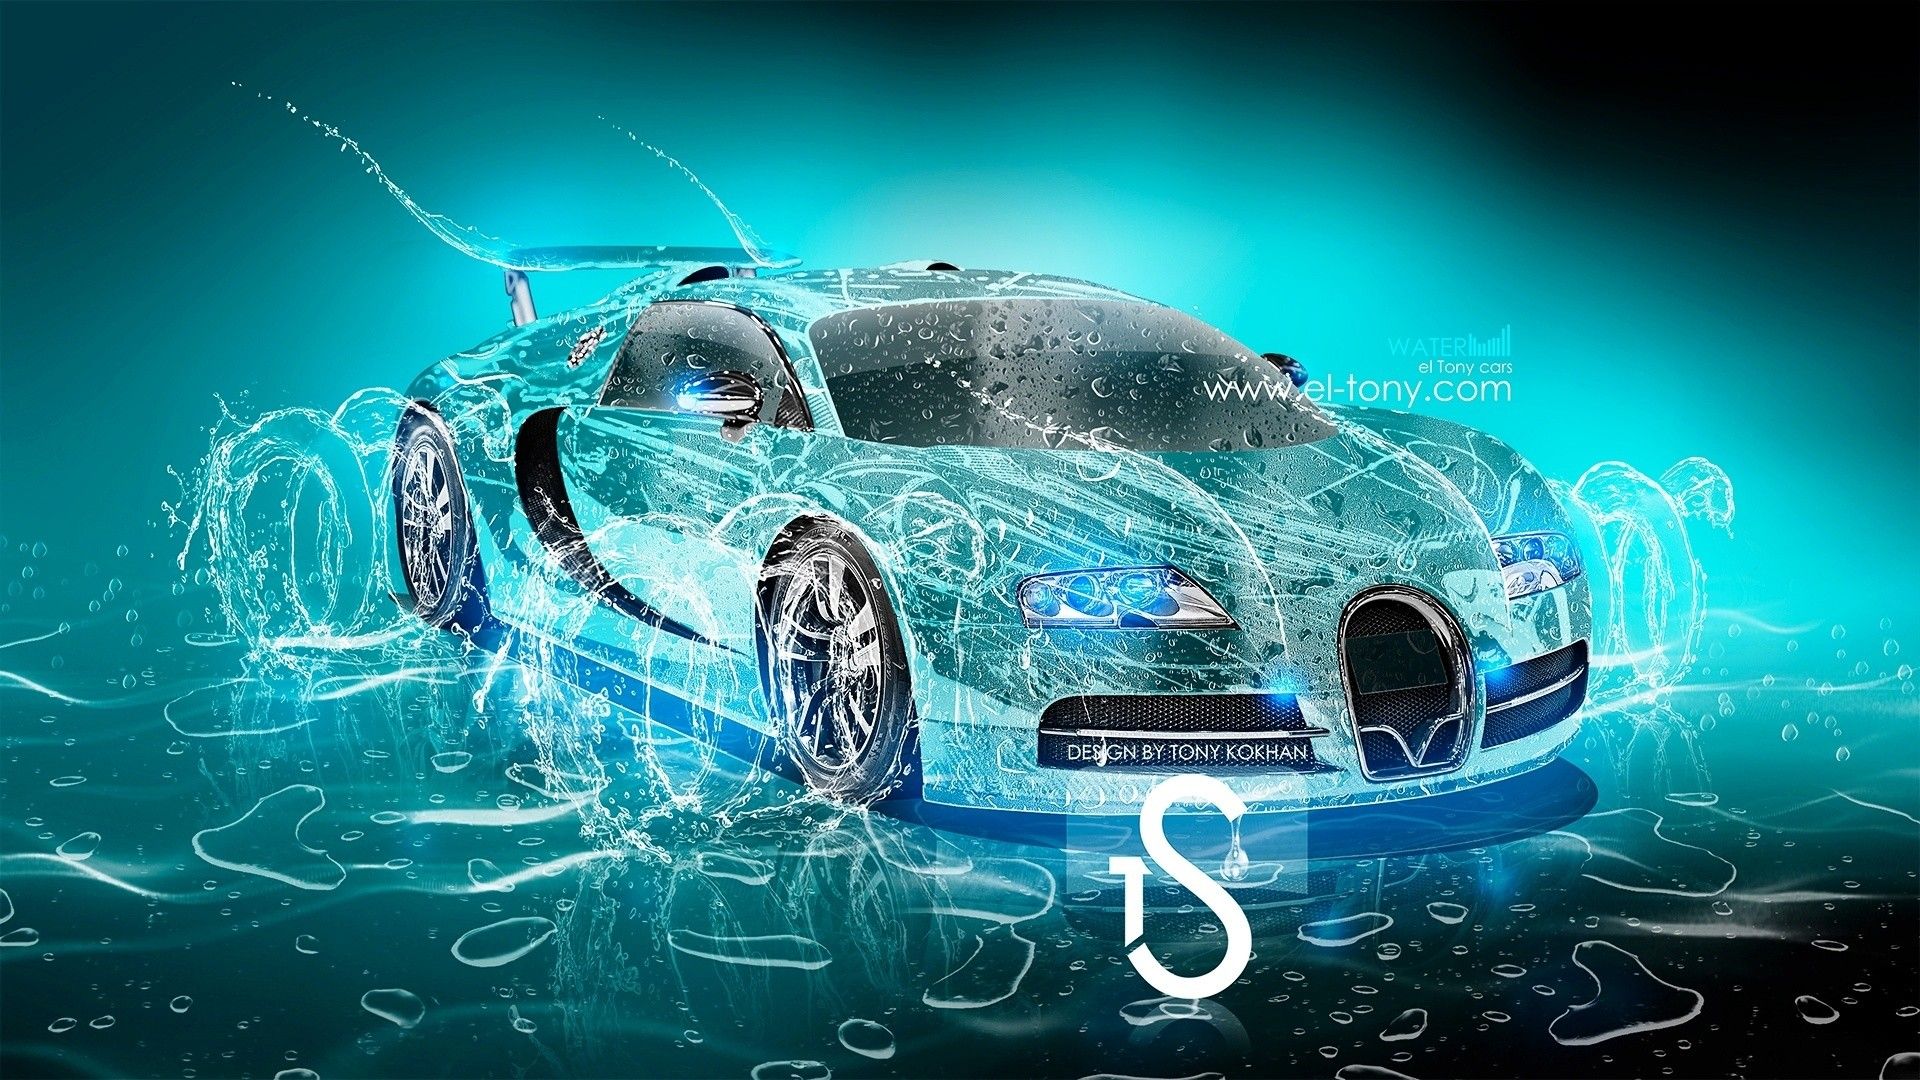 Design Talent Showcase Tony.com Brings Sensual Elements Fire And Water To YOUR Car Wallpaper 5